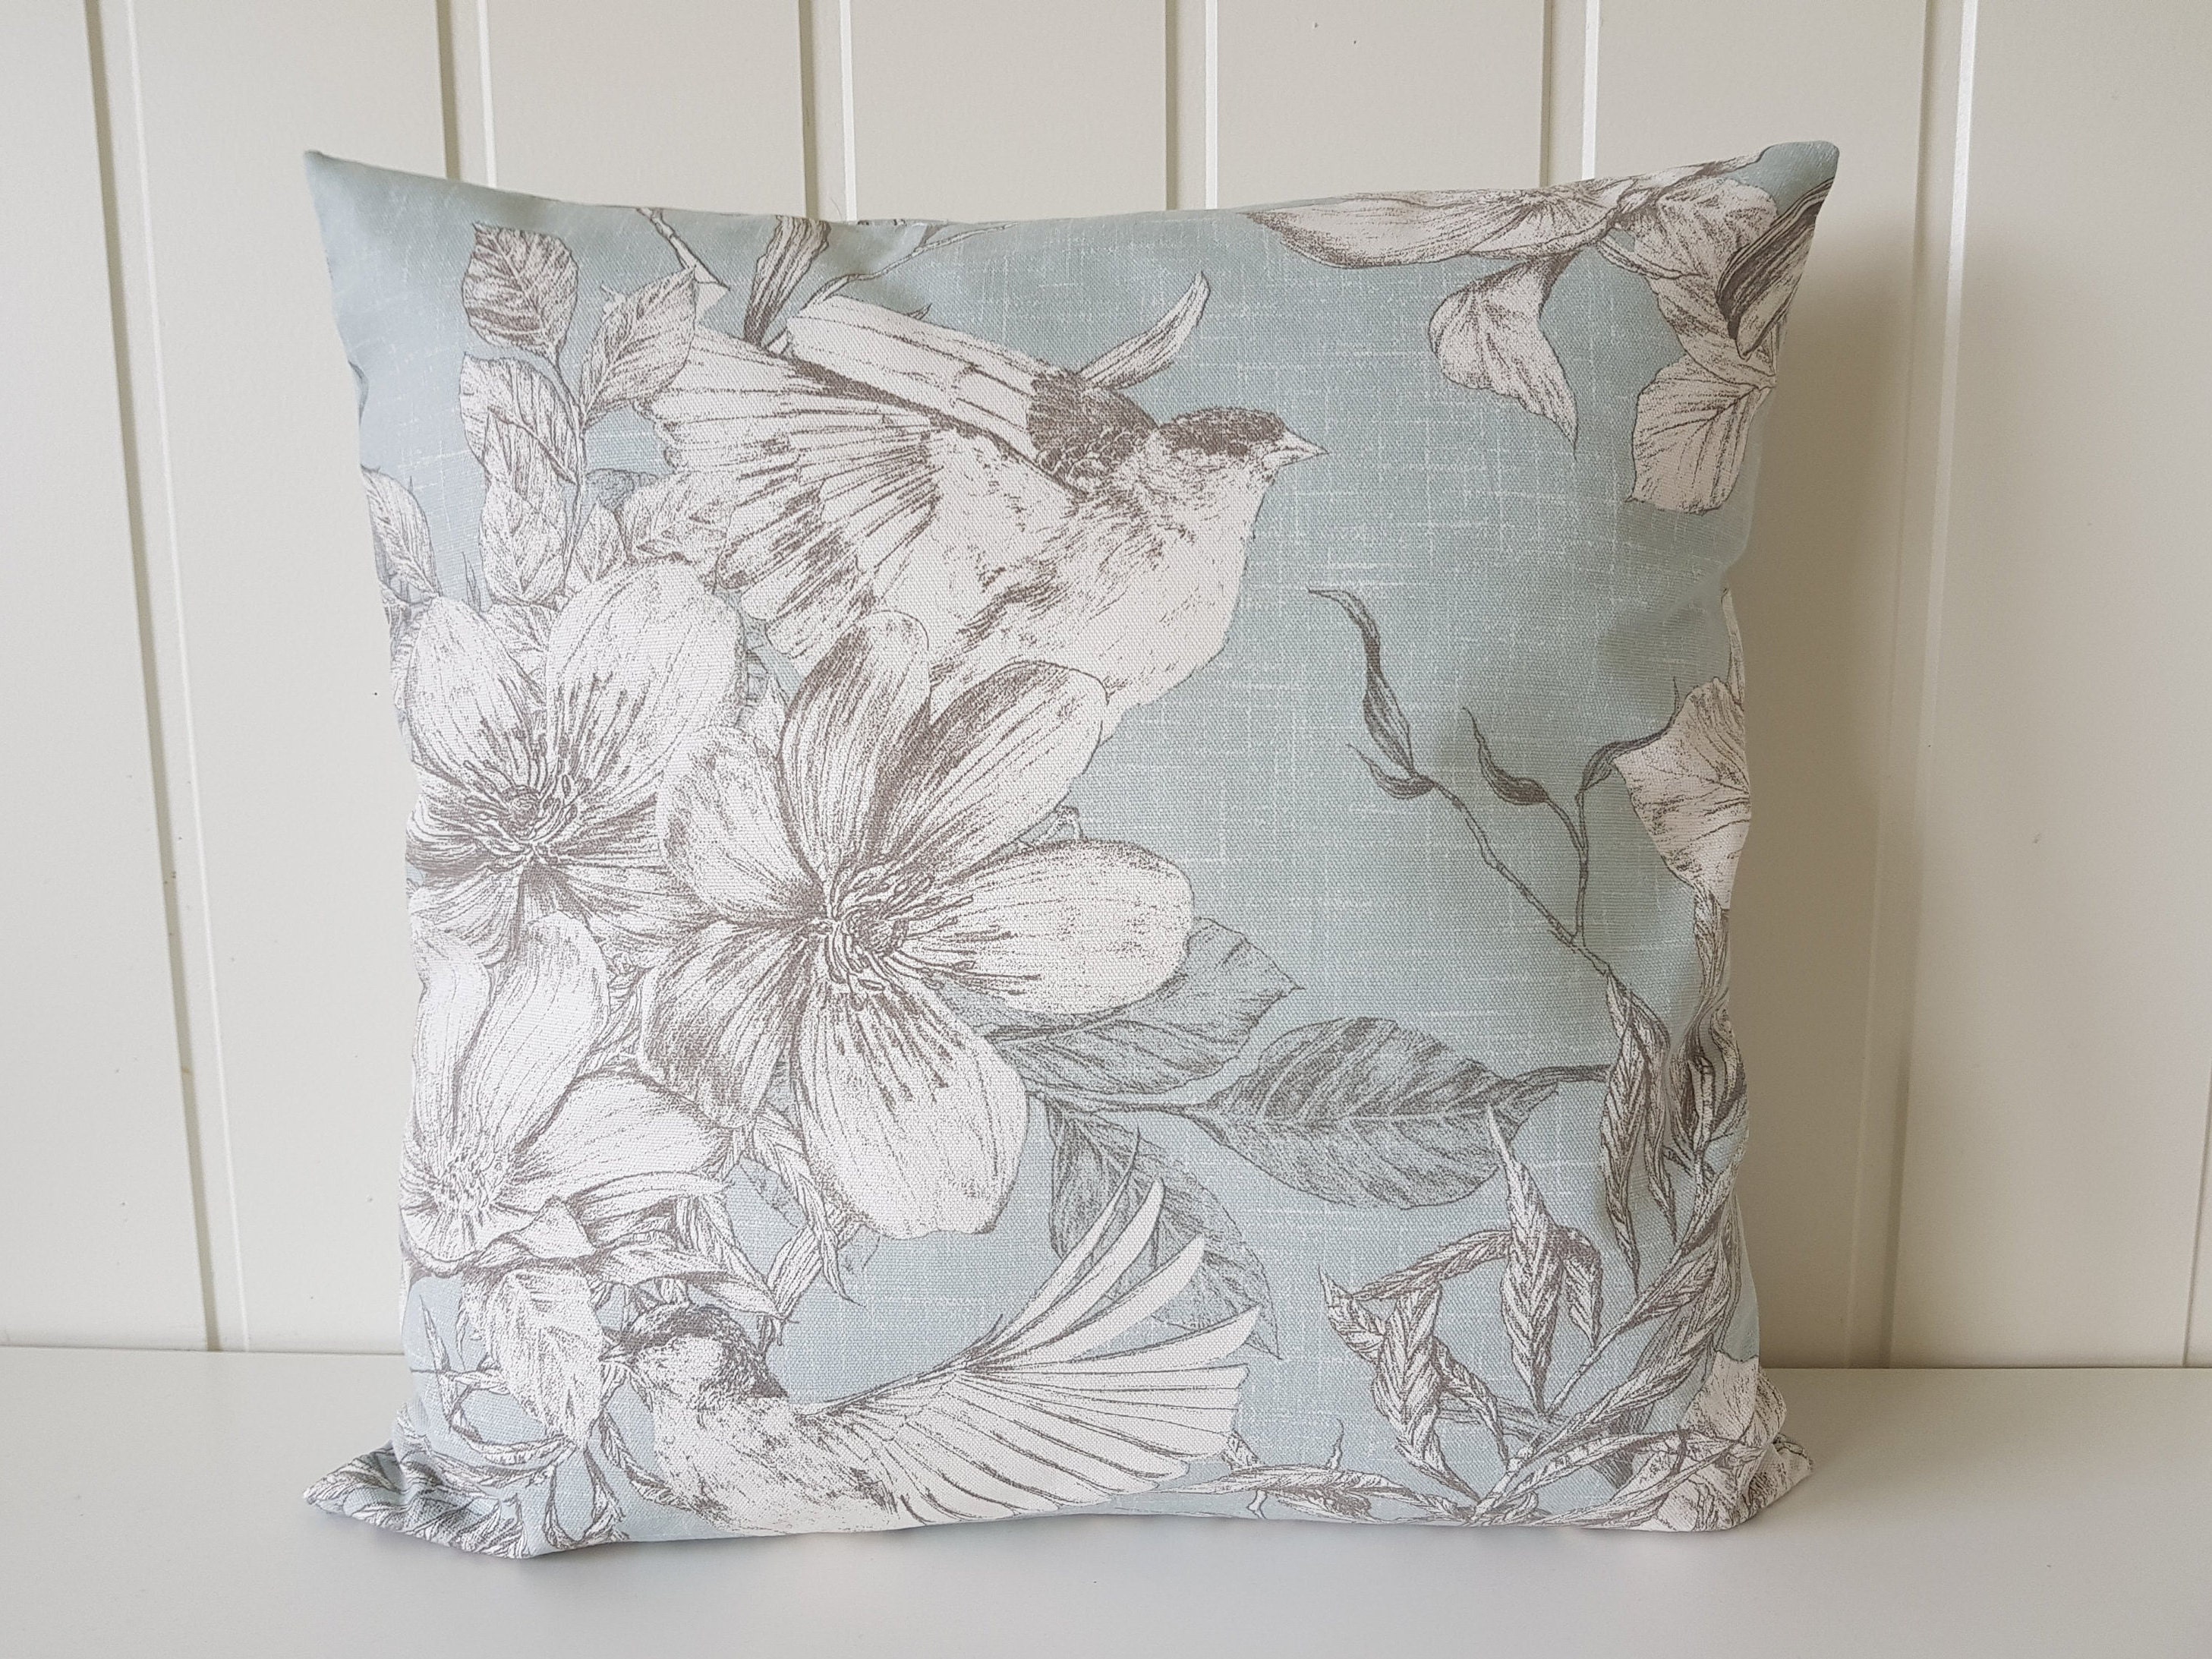 Decorative Pillow in Macbeth Heather Gray Floral